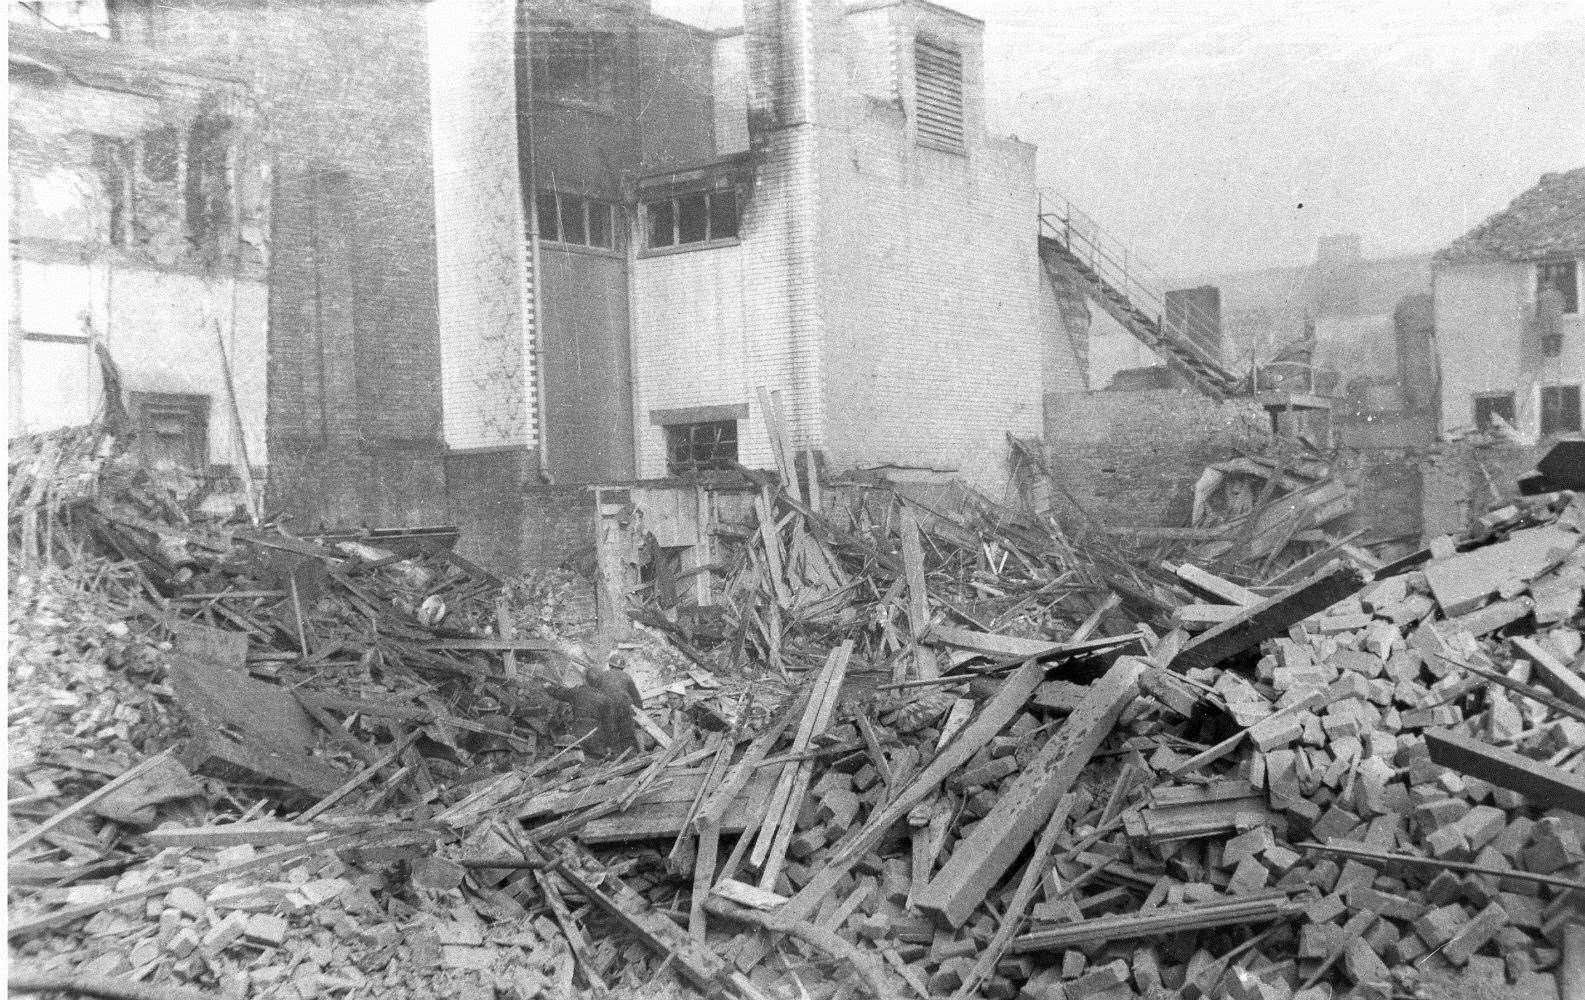 Damage in Canterbury caused by German bombers during the Second World War